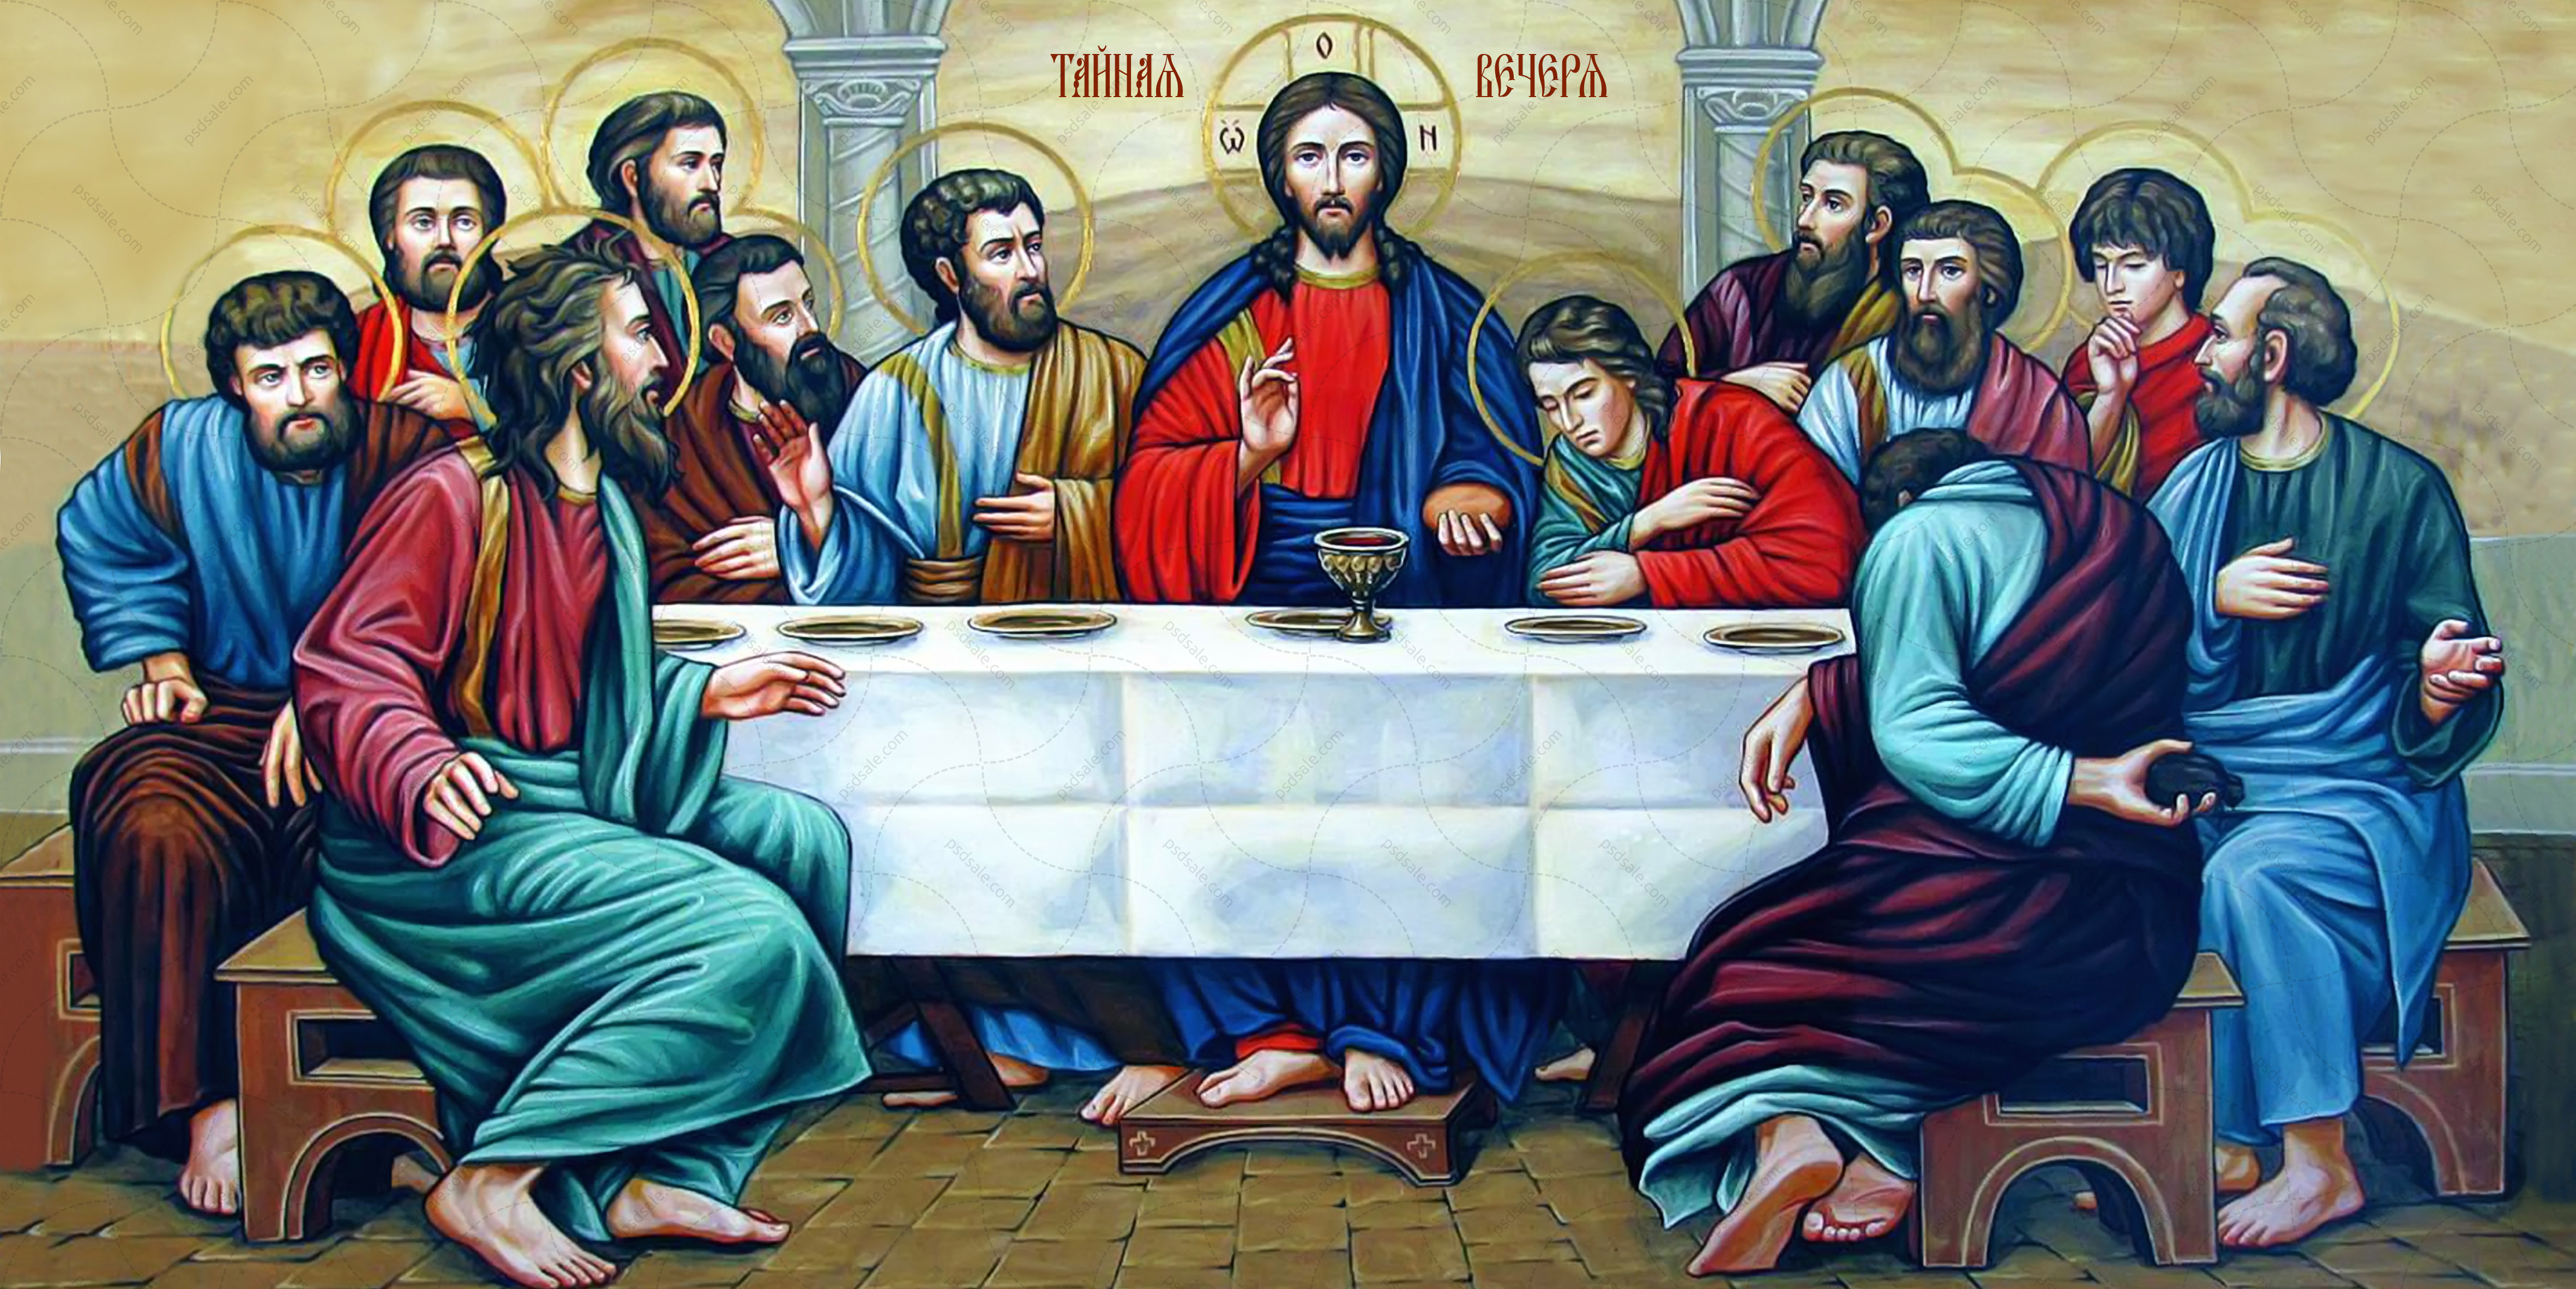 Buy the image of icon: The Last Supper